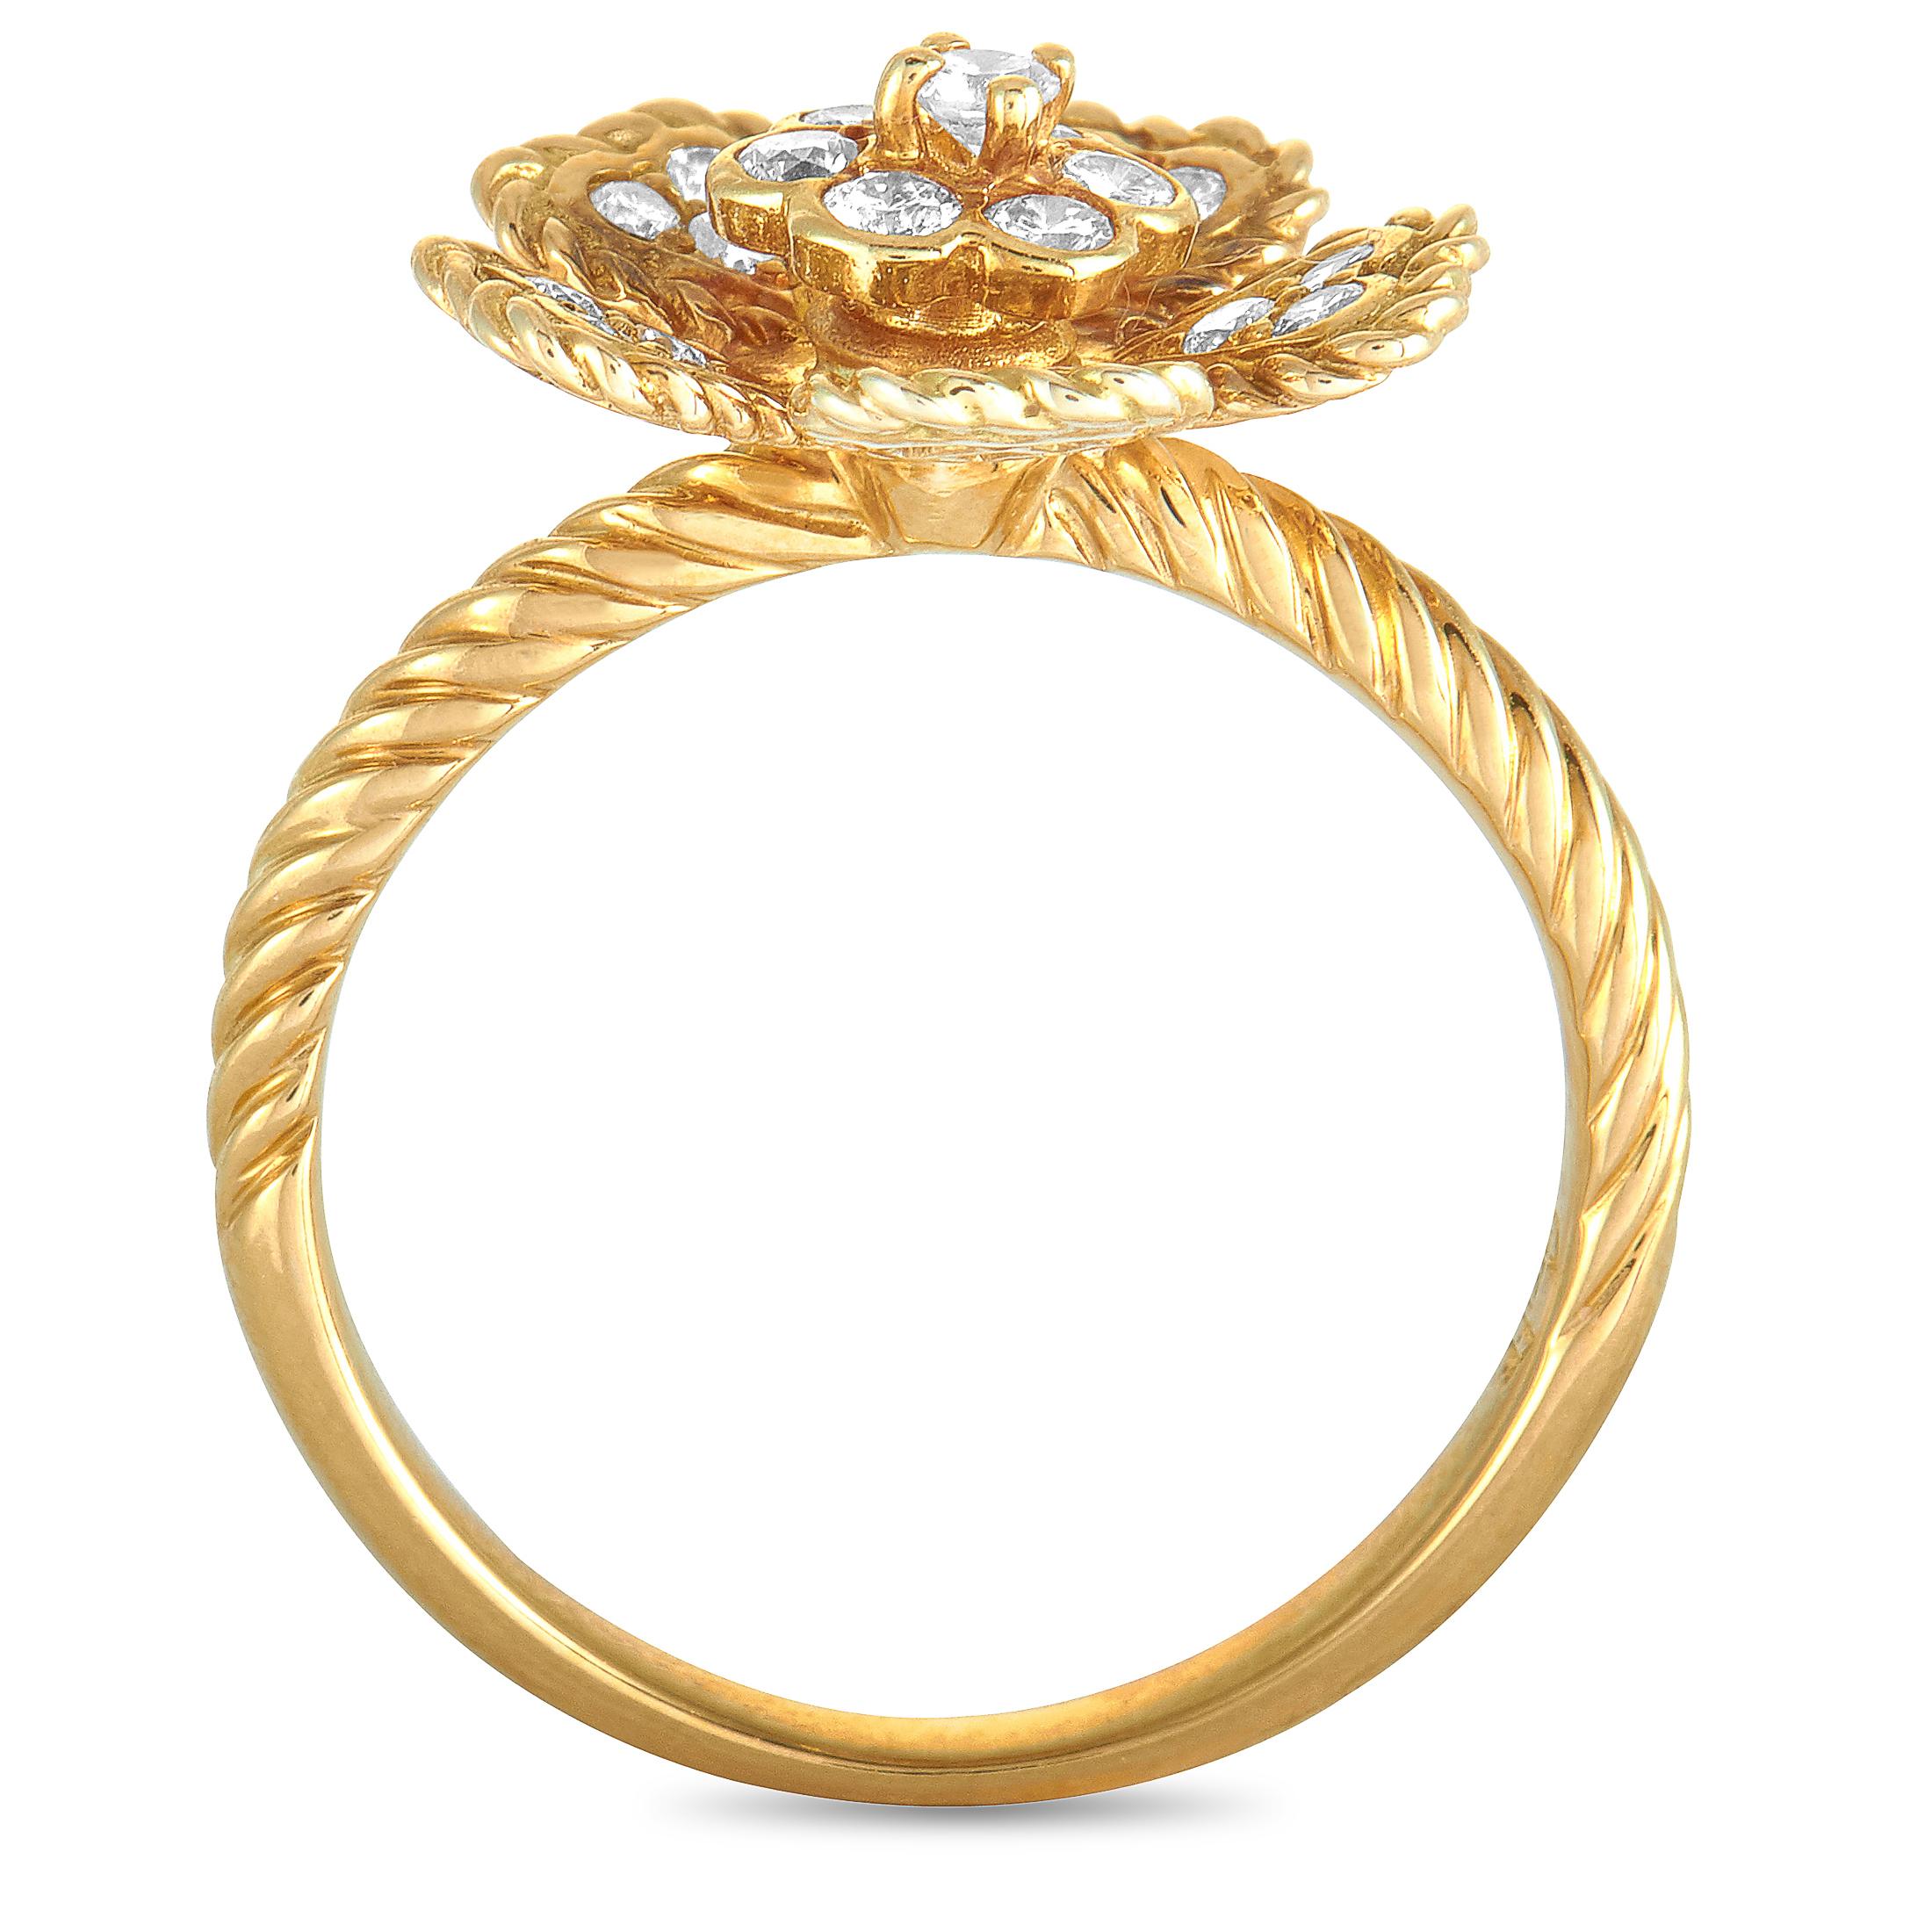 This Graff ring is made out of 18K yellow gold and diamonds that total 0.41 carats. The ring weighs 4.1 grams and boasts band thickness of 2 mm and top height of 6 mm, while top dimensions measure 14 by 12 mm.
Ring Size: 5.5

Offered in estate